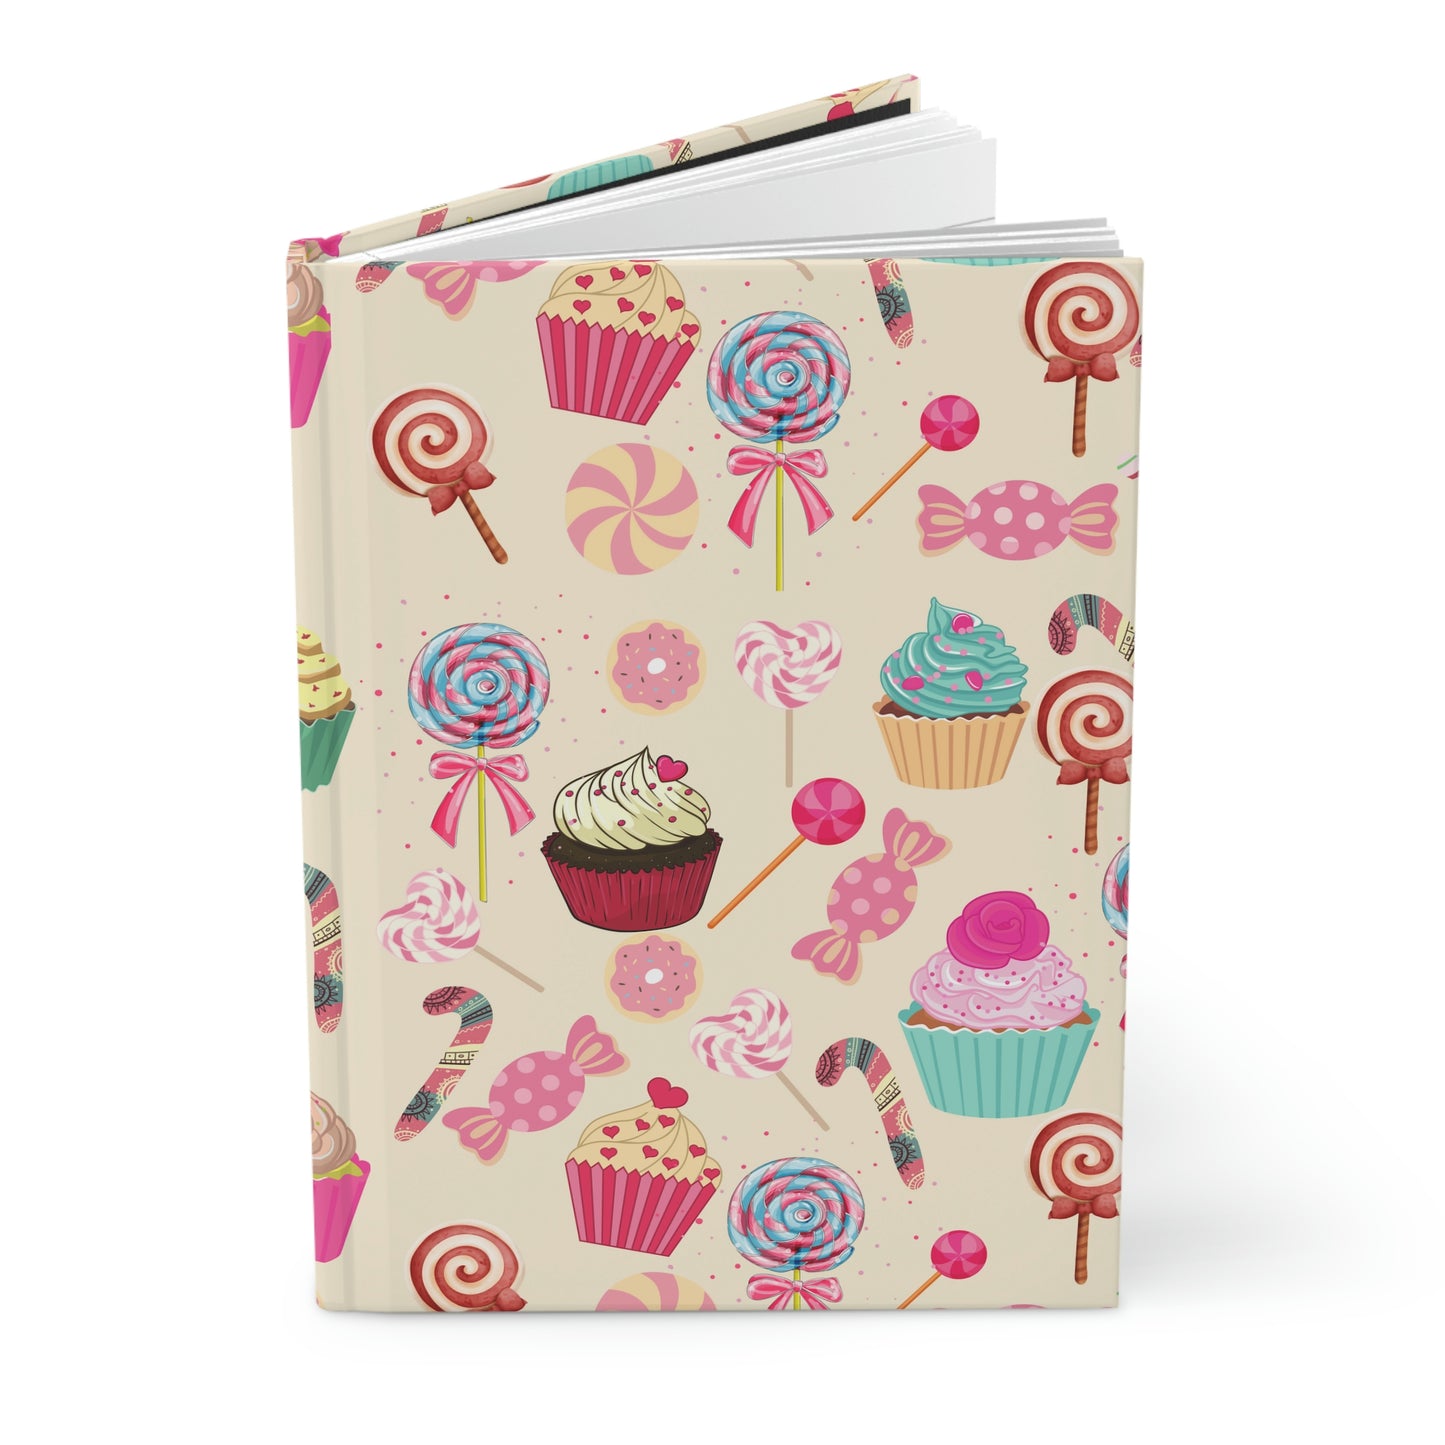 Pink Candy Hard Cover Journal / Cupcake Journal